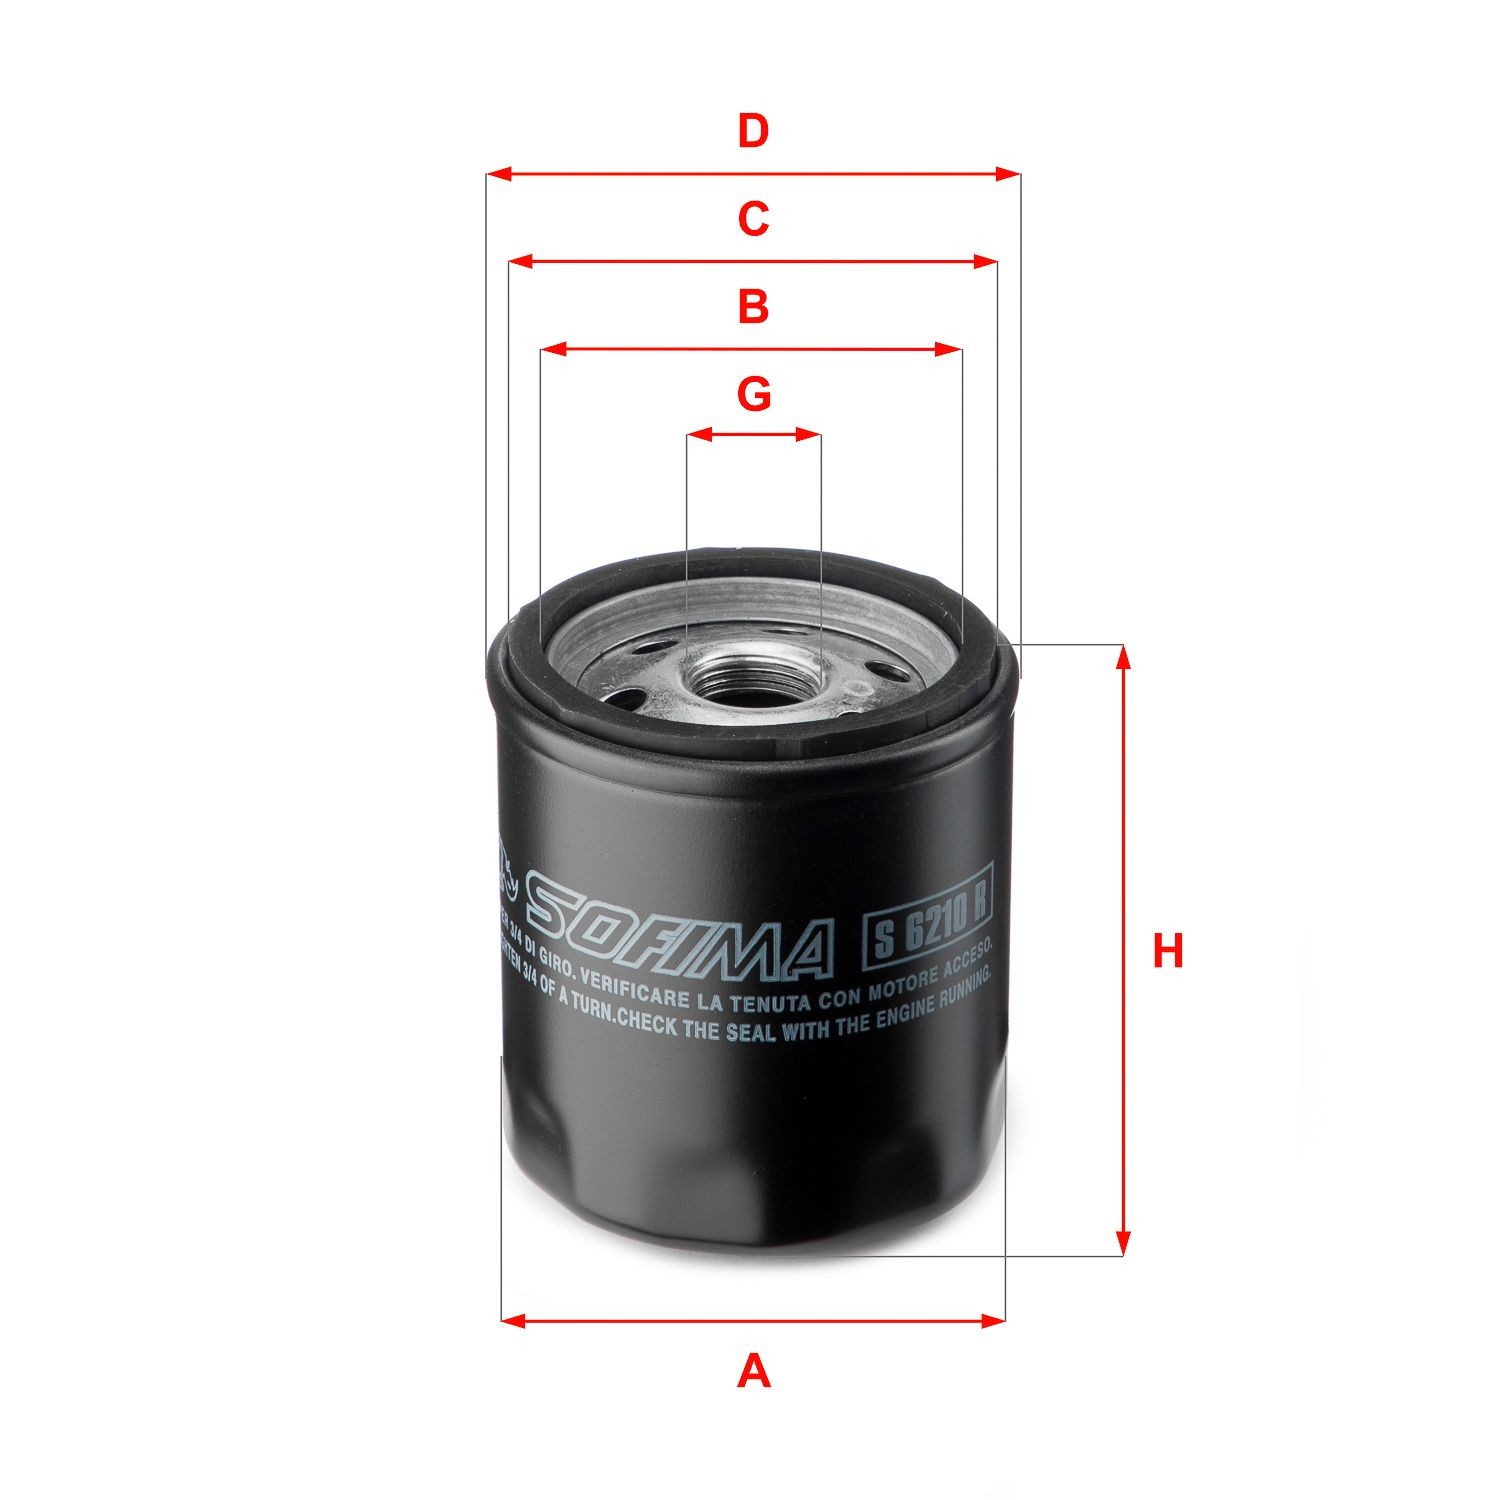 SOFIMA S 6210 R Oil filter M 20 X 1,5, with one anti-return valve, Spin-on Filter